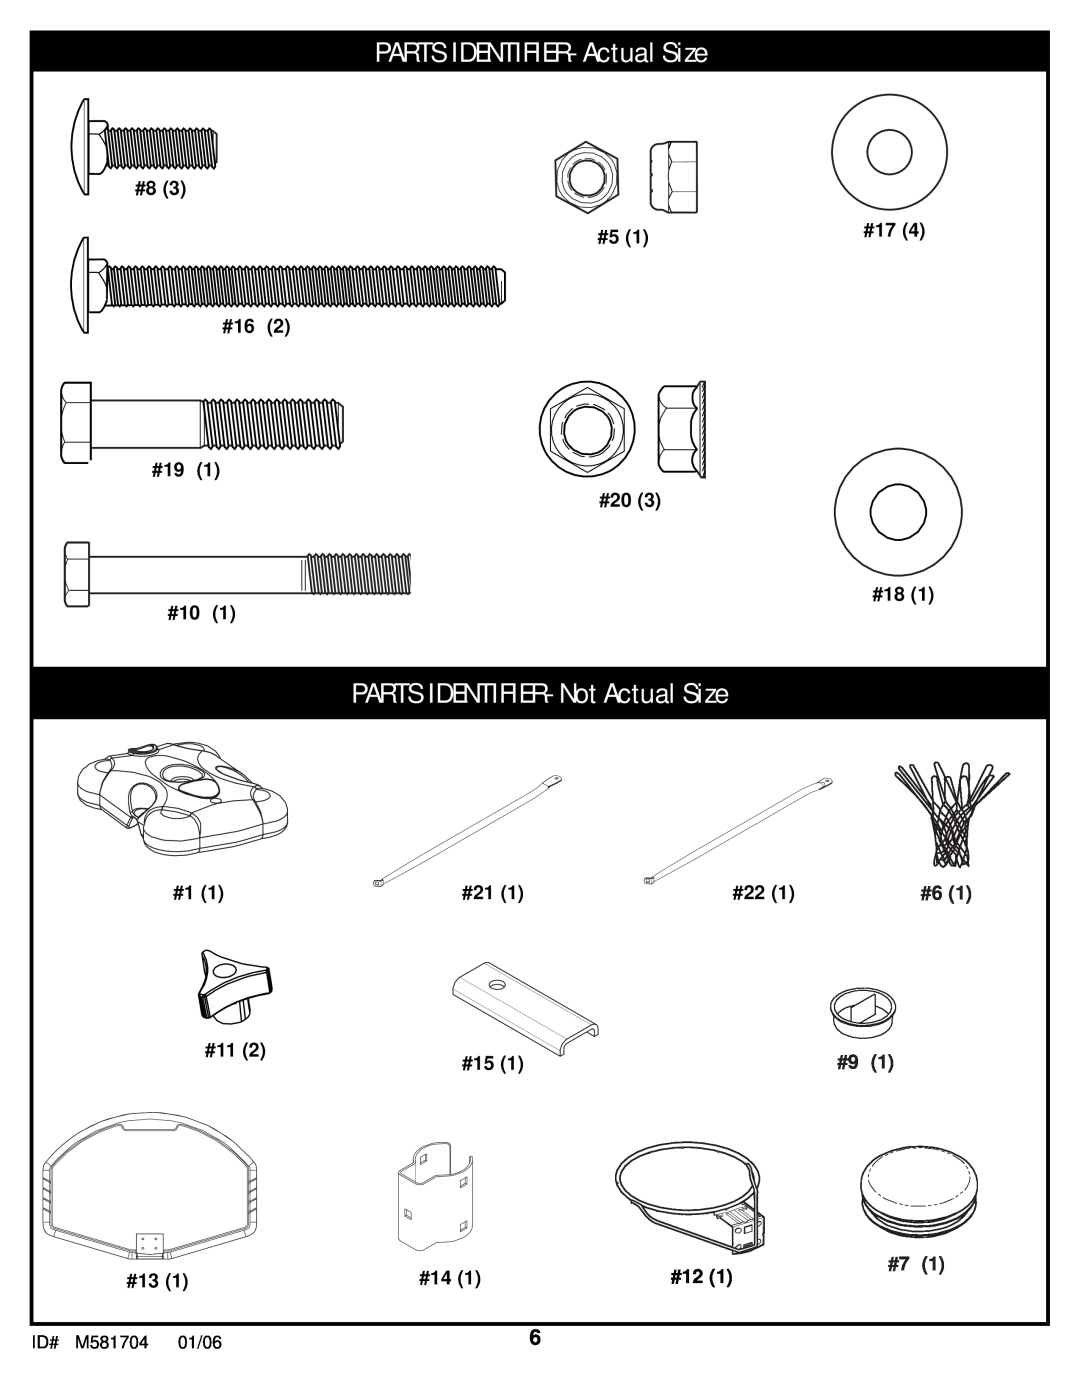 Huffy M581704 manual PARTS IDENTIFIER- Actual Size, PARTS IDENTIFIER- Not Actual Size 